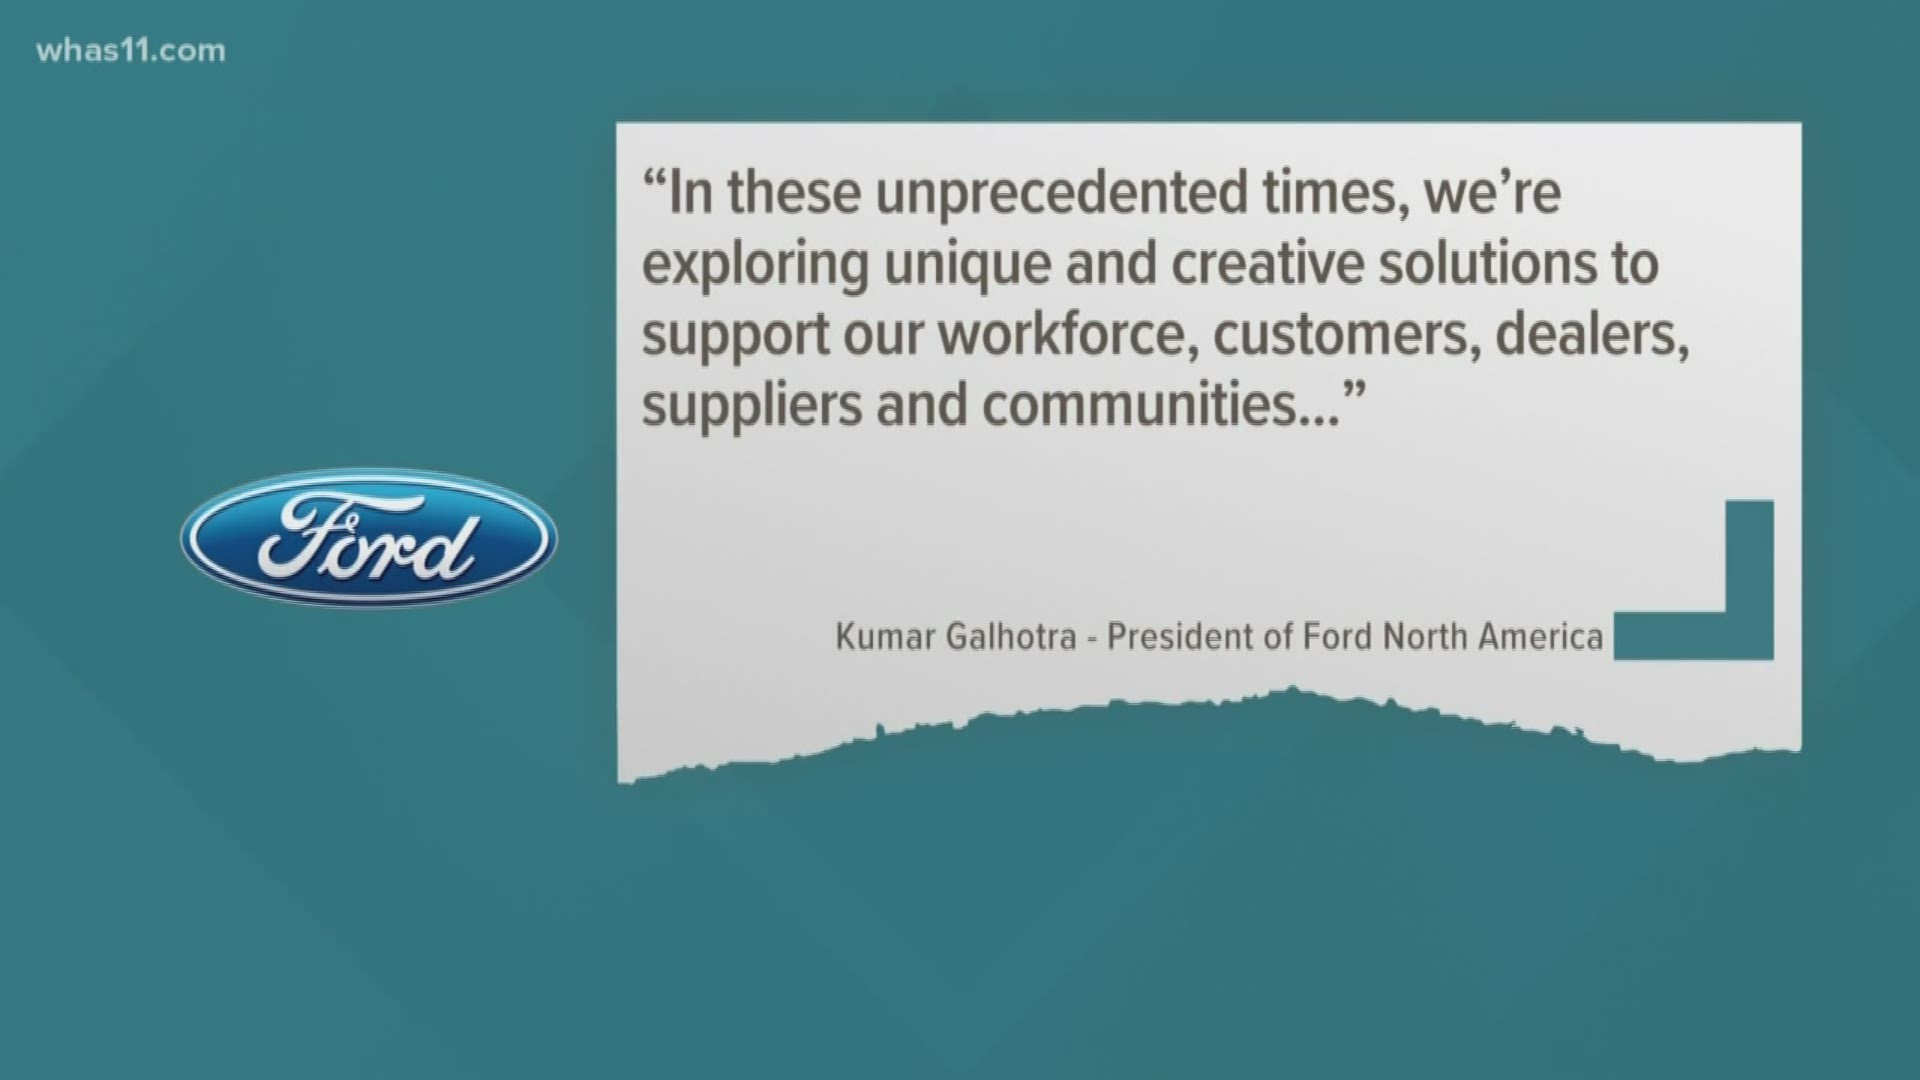 Ford said in statement they're exploring unique and creative solutions to support workers and customers. Workers at UPS and GE have also reached out to